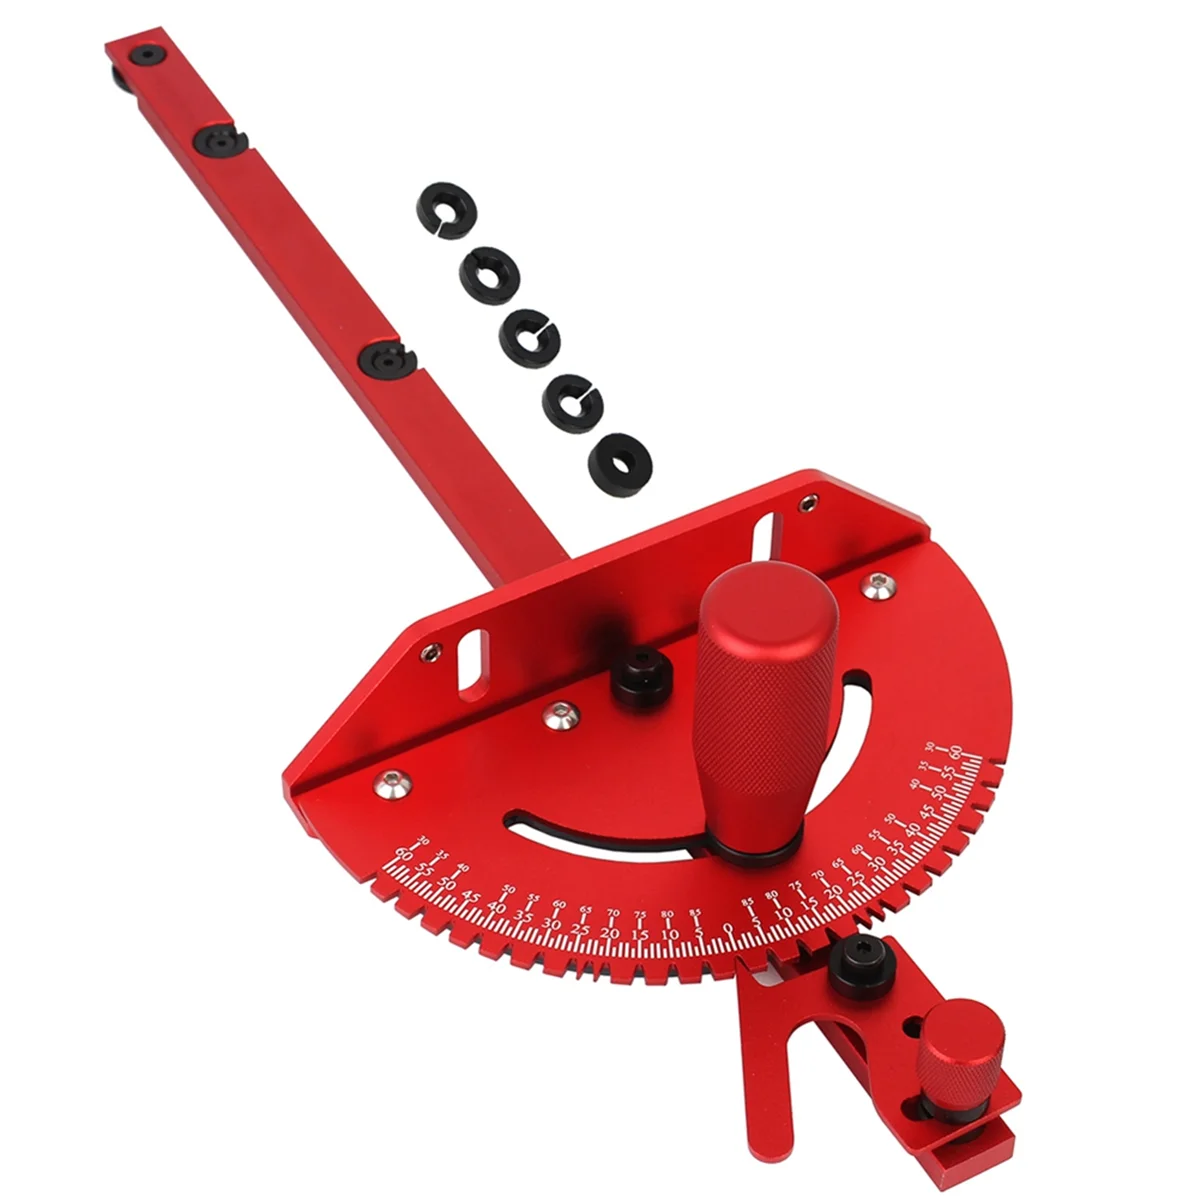 

Miter Gauge Aluminum Alloy Handle Benche Table Saw Router Miter Gauge Sawing Assembly Ruler Woodworking Tools-Red